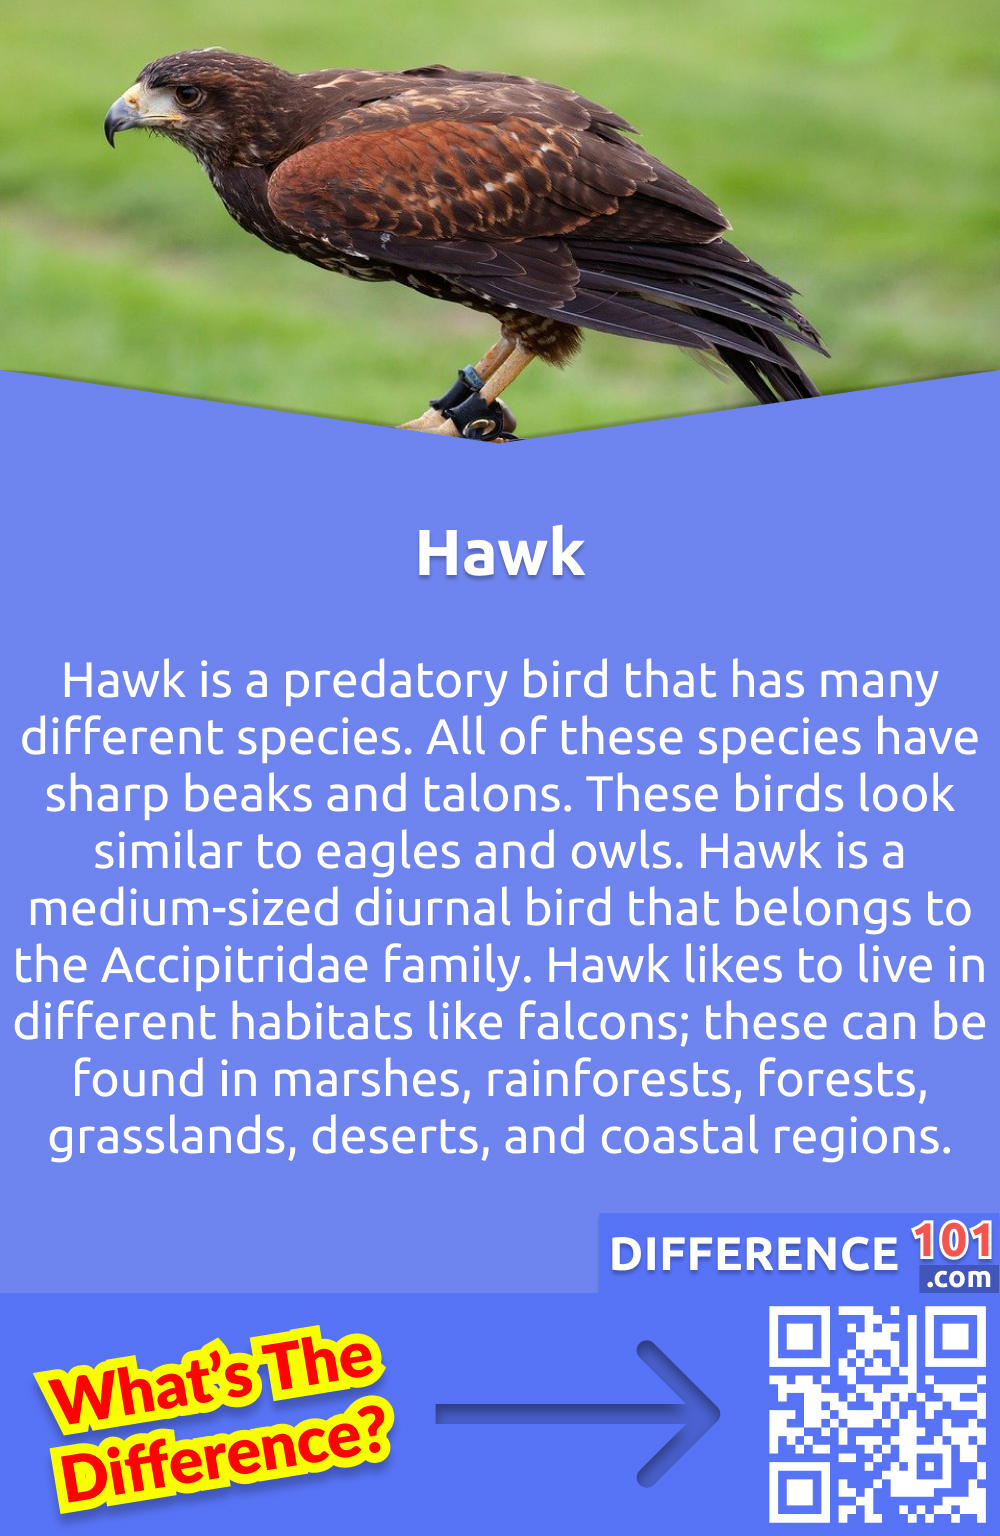 What is a Hawk? Hawk is a predatory bird that has many different species. All of these species have sharp beaks and talons. These birds look similar to eagles and owls. Hawk is a medium-sized diurnal bird that belongs to the Accipitridae family. Hawk likes to live in different habitats like falcons; these can be found in marshes, rainforests, forests,  grasslands, deserts, and coastal regions. 